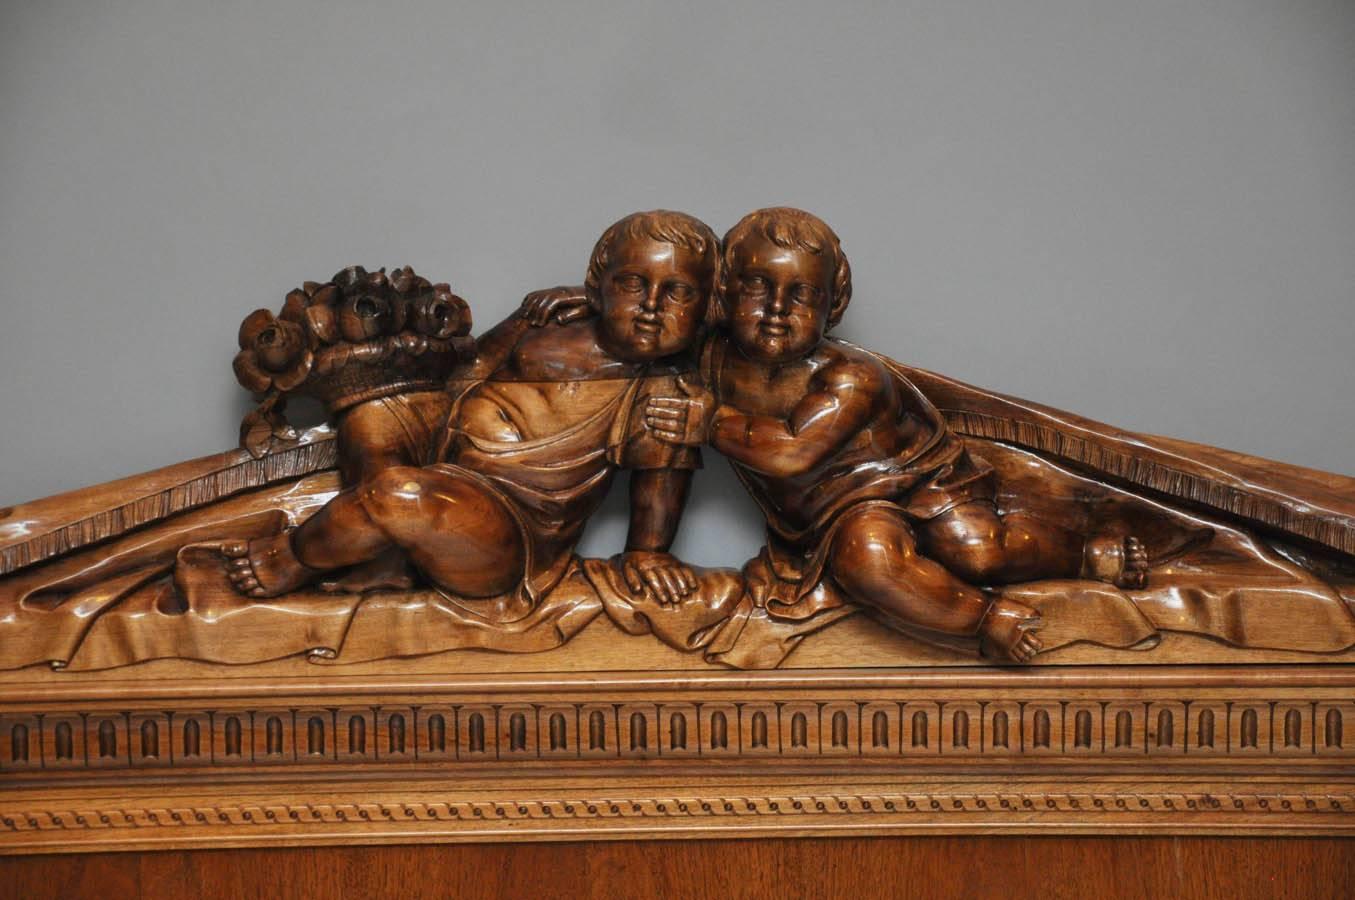 19th century Venetian walnut bed. Renaissance inspired pair of cherubs draped in fabric with urn of flowers surmounting the headboard. Footboard with a crouching putti on each end holding up loosely draped fabric.